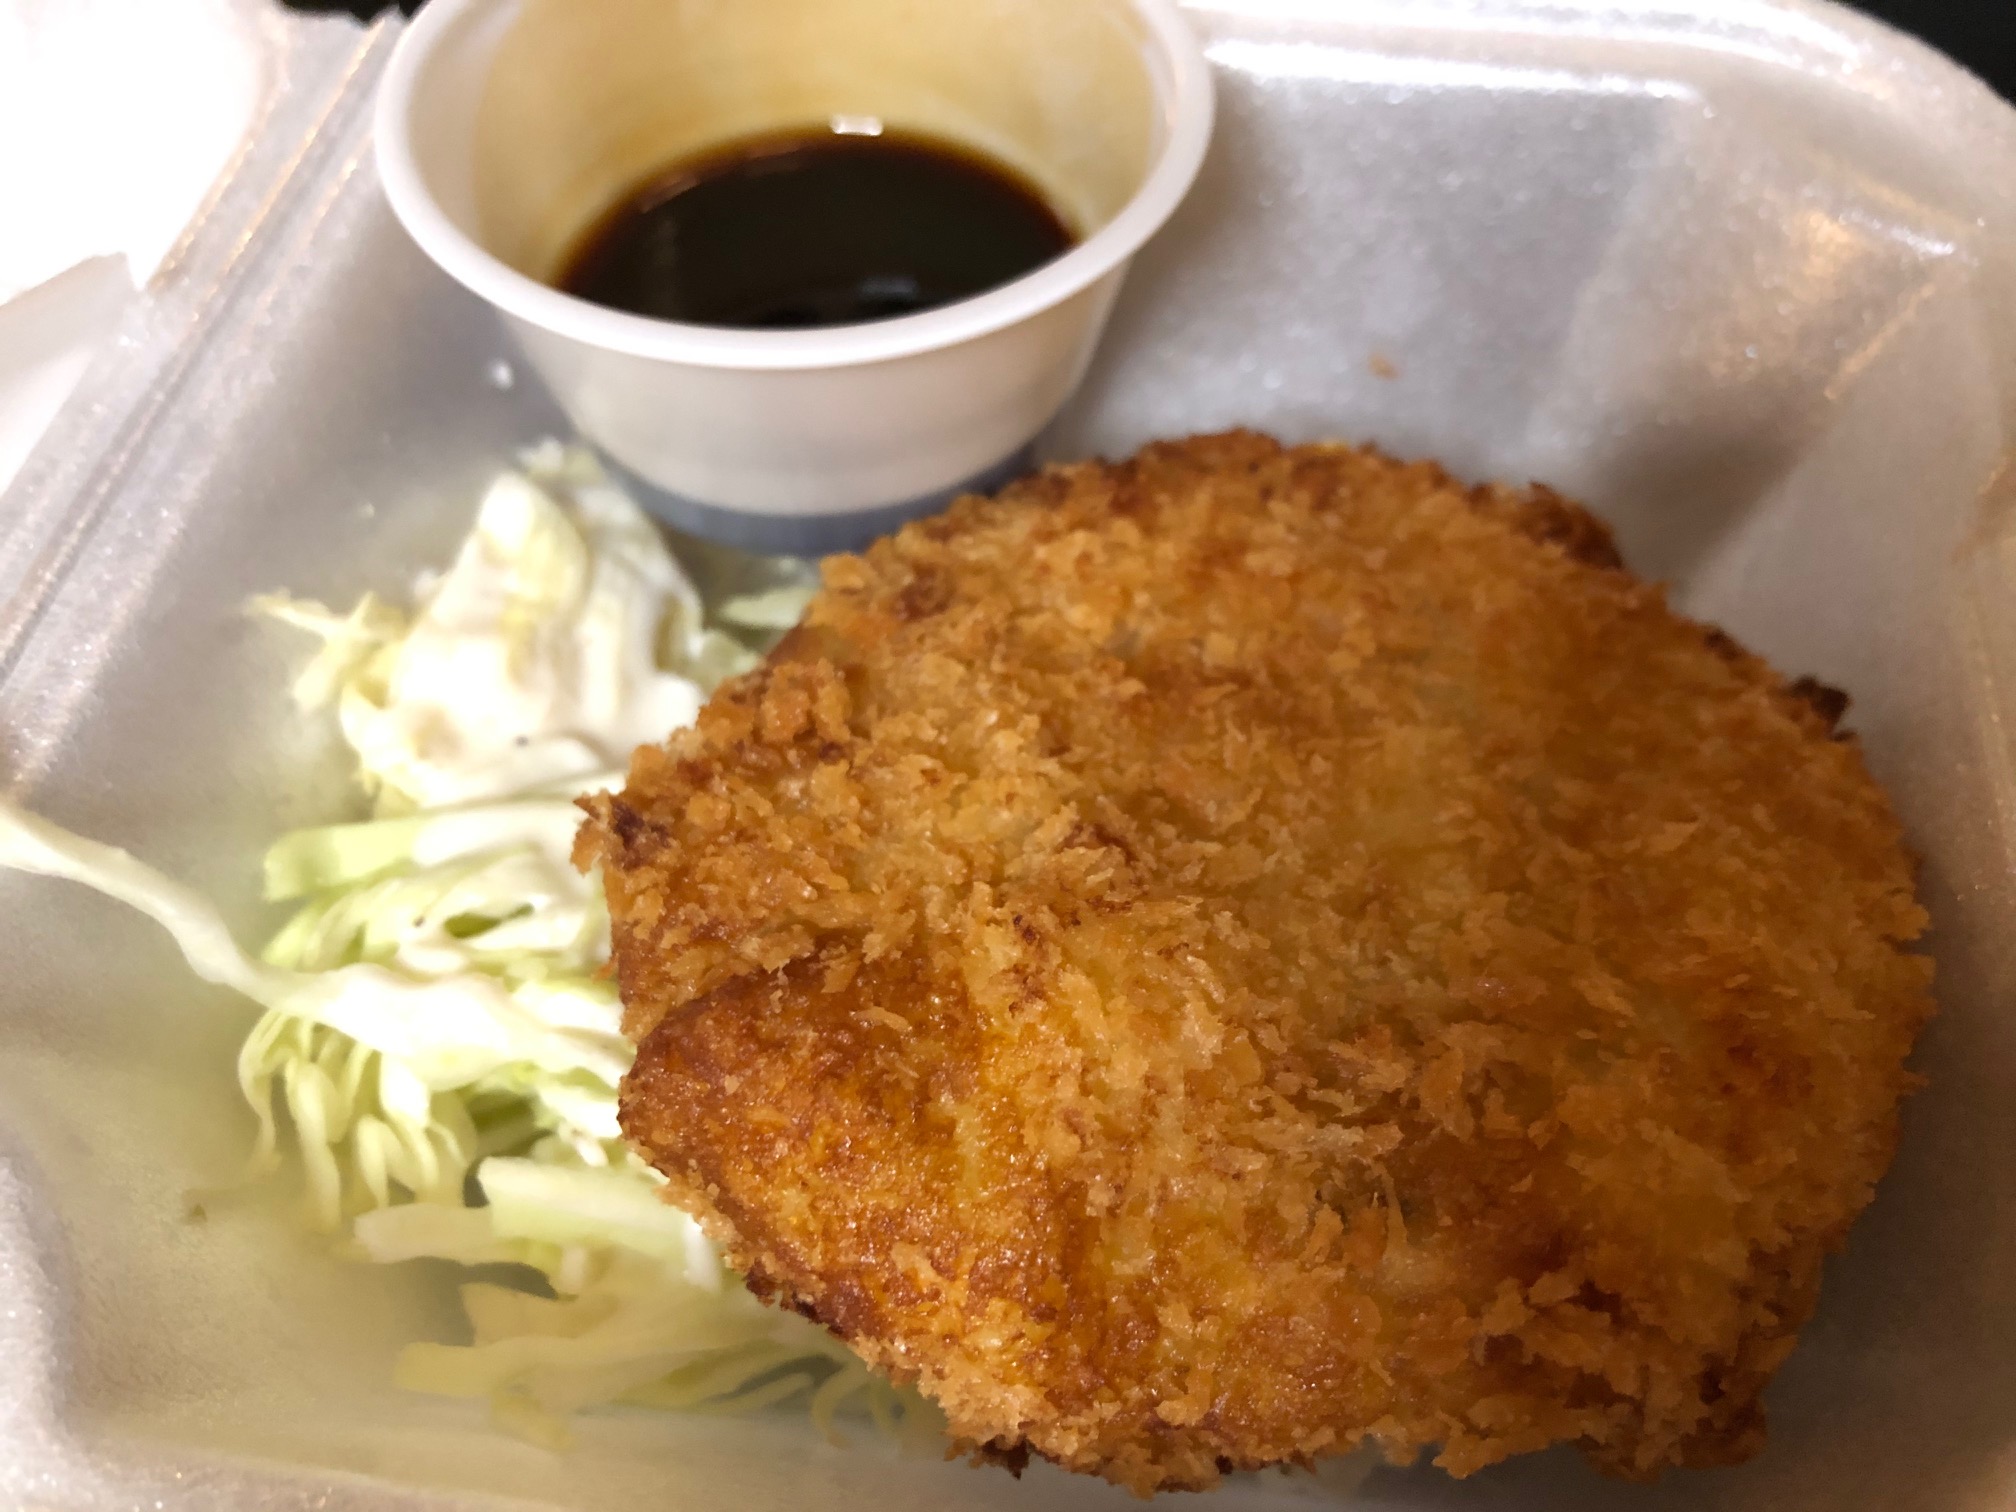 There is a korokke appetizer in a small square takeout container. There is also undressed lettuce and a cup of dipping sauce. Photo by Alyssa Buckley.